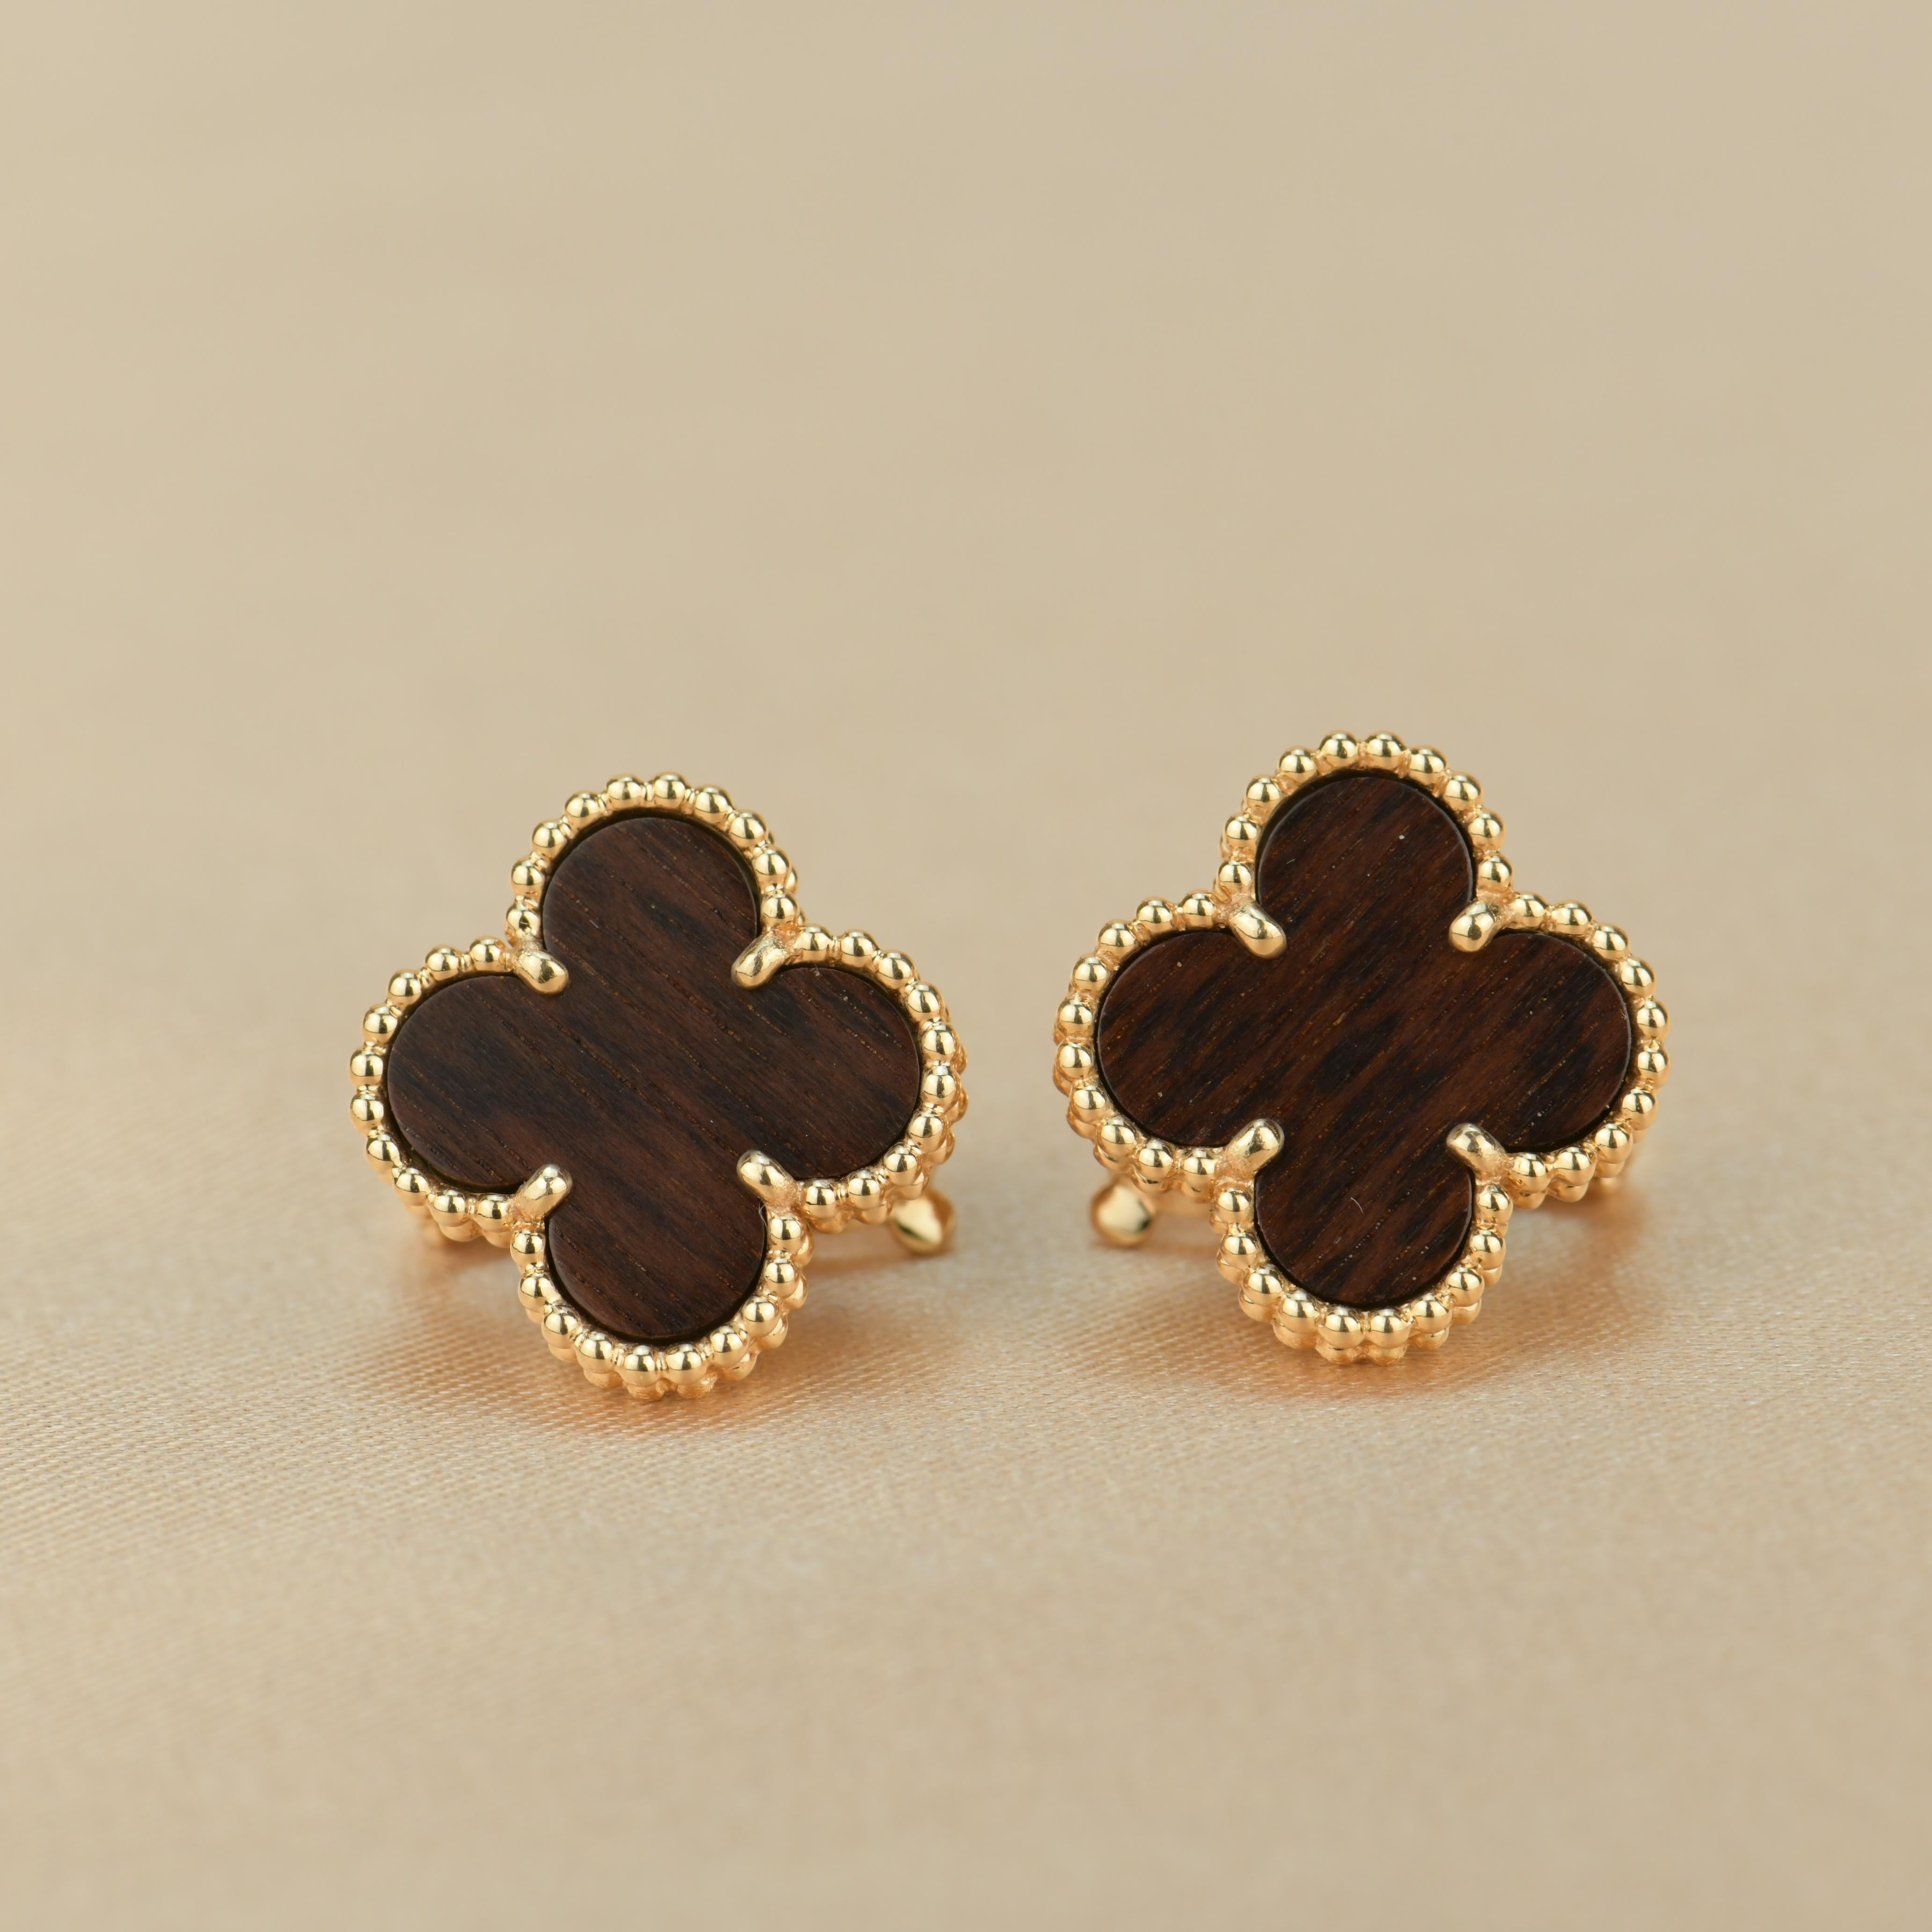 This is a very rare limited edition. VCA doesn't produce letter wood earring collection anymore. This would be a very wise investment piece. 

Dandelion Antiques Code	AT-0925
Brand	                                Van Cleef & Arpels
Model	           